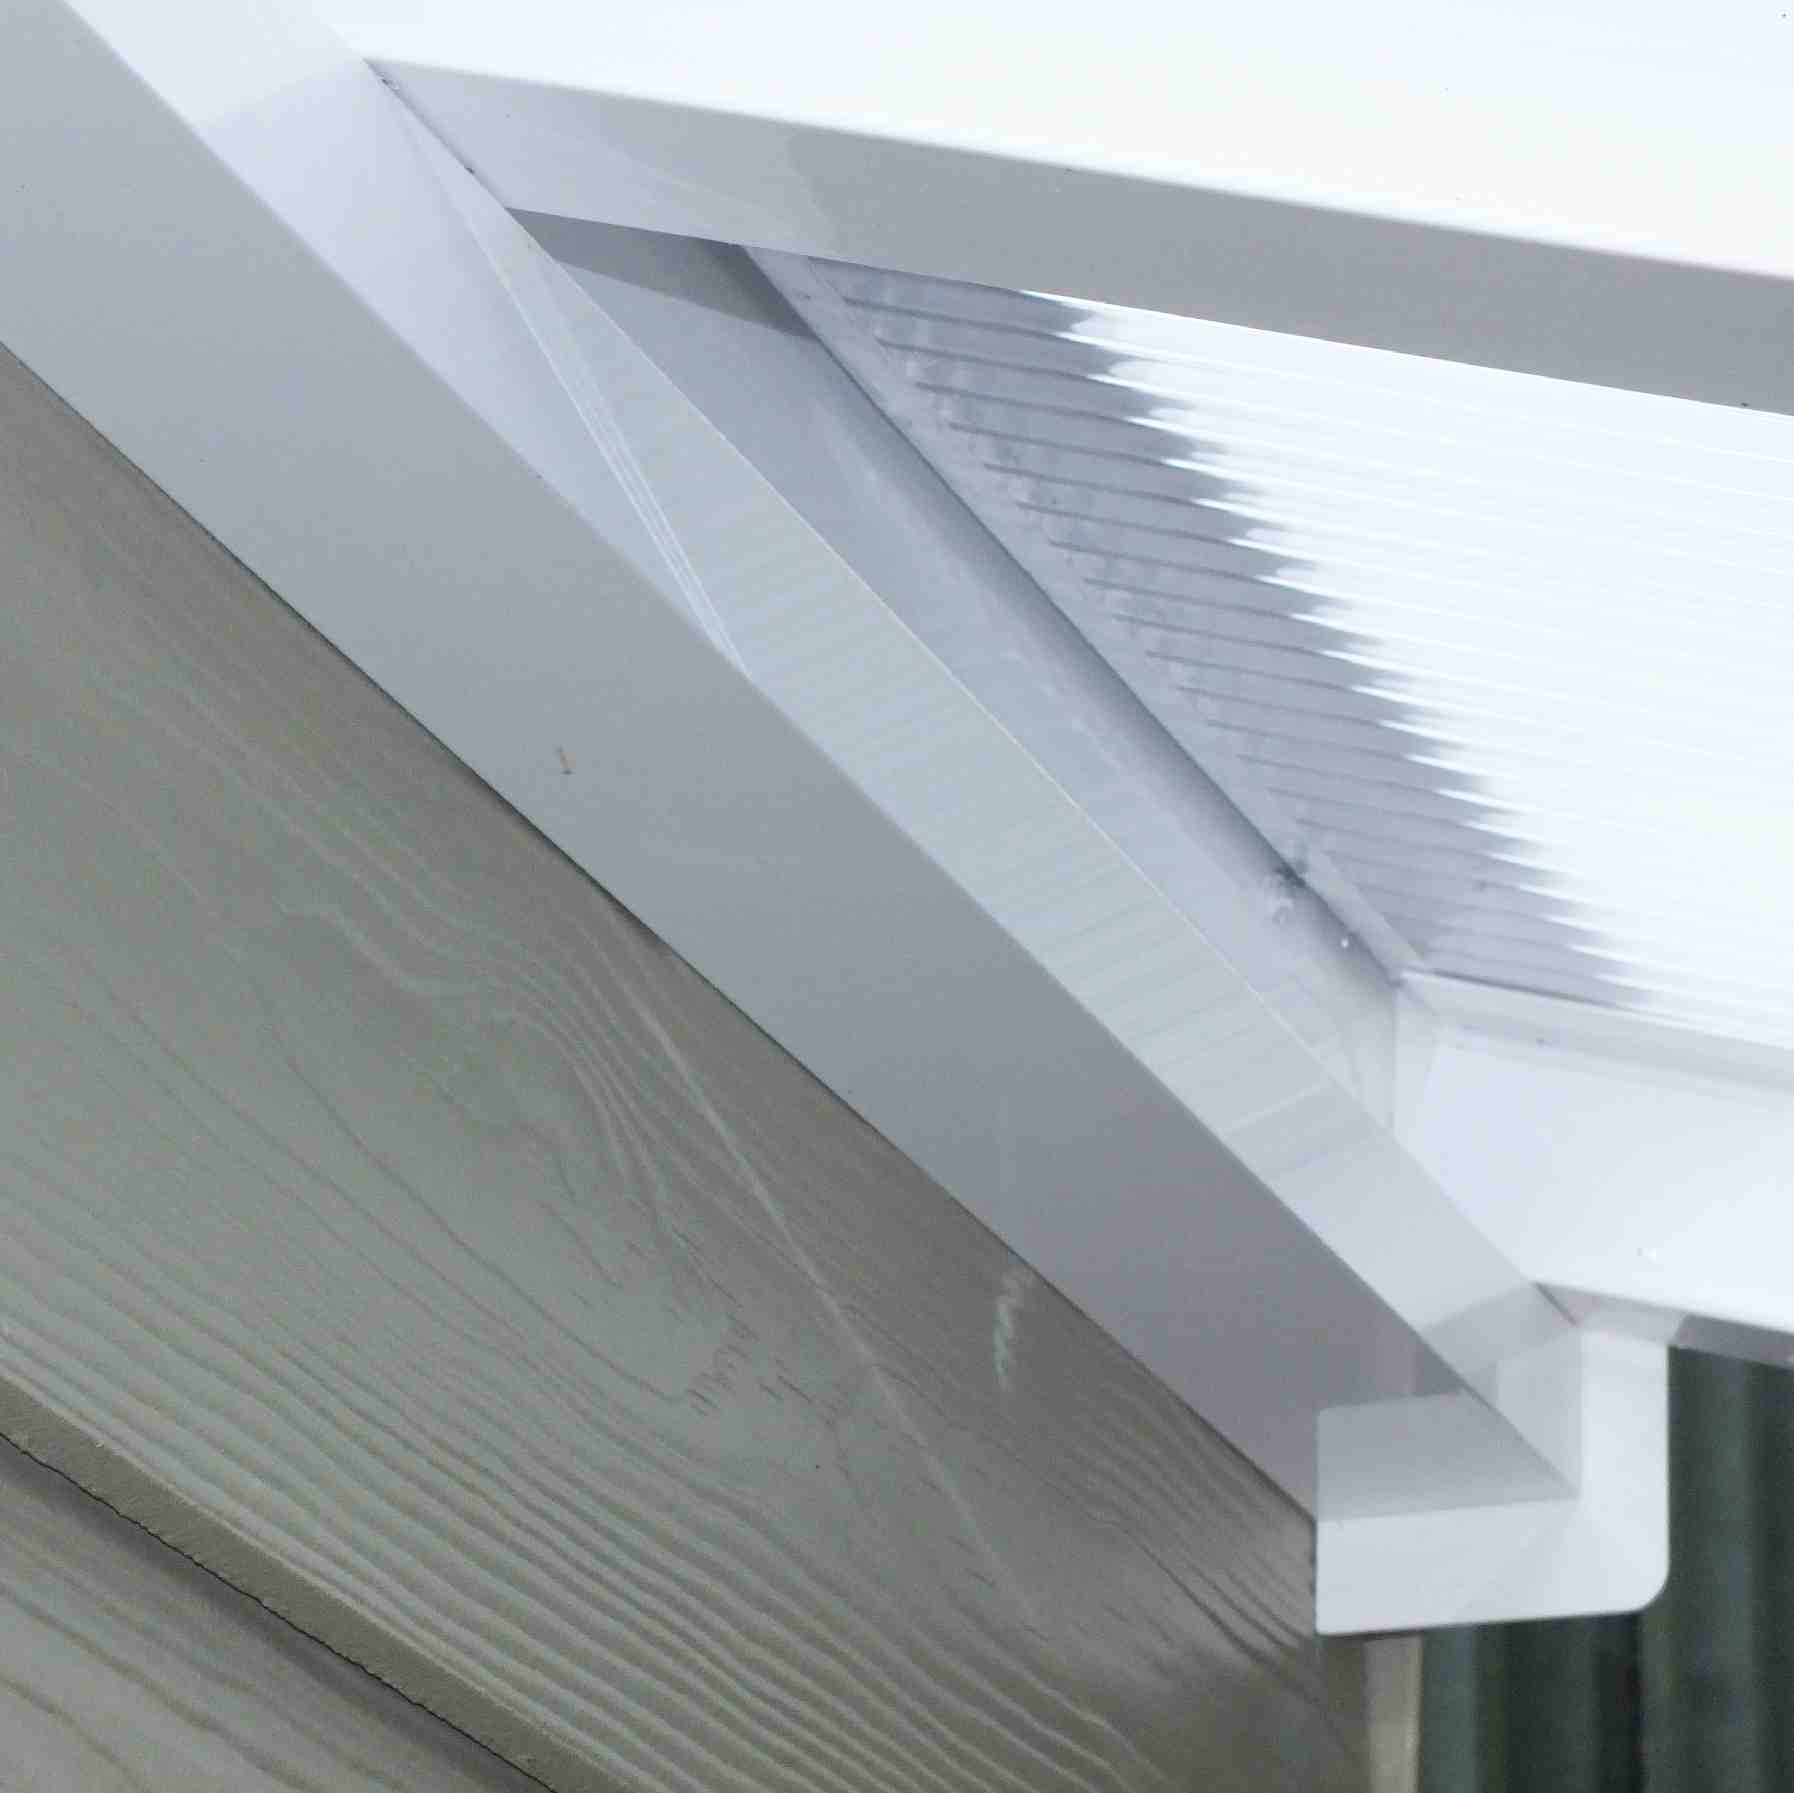 Great deals on Omega Verandah White with 16mm Polycarbonate Glazing - 7.0m (W) x 3.5m (P), (4) Supporting Posts